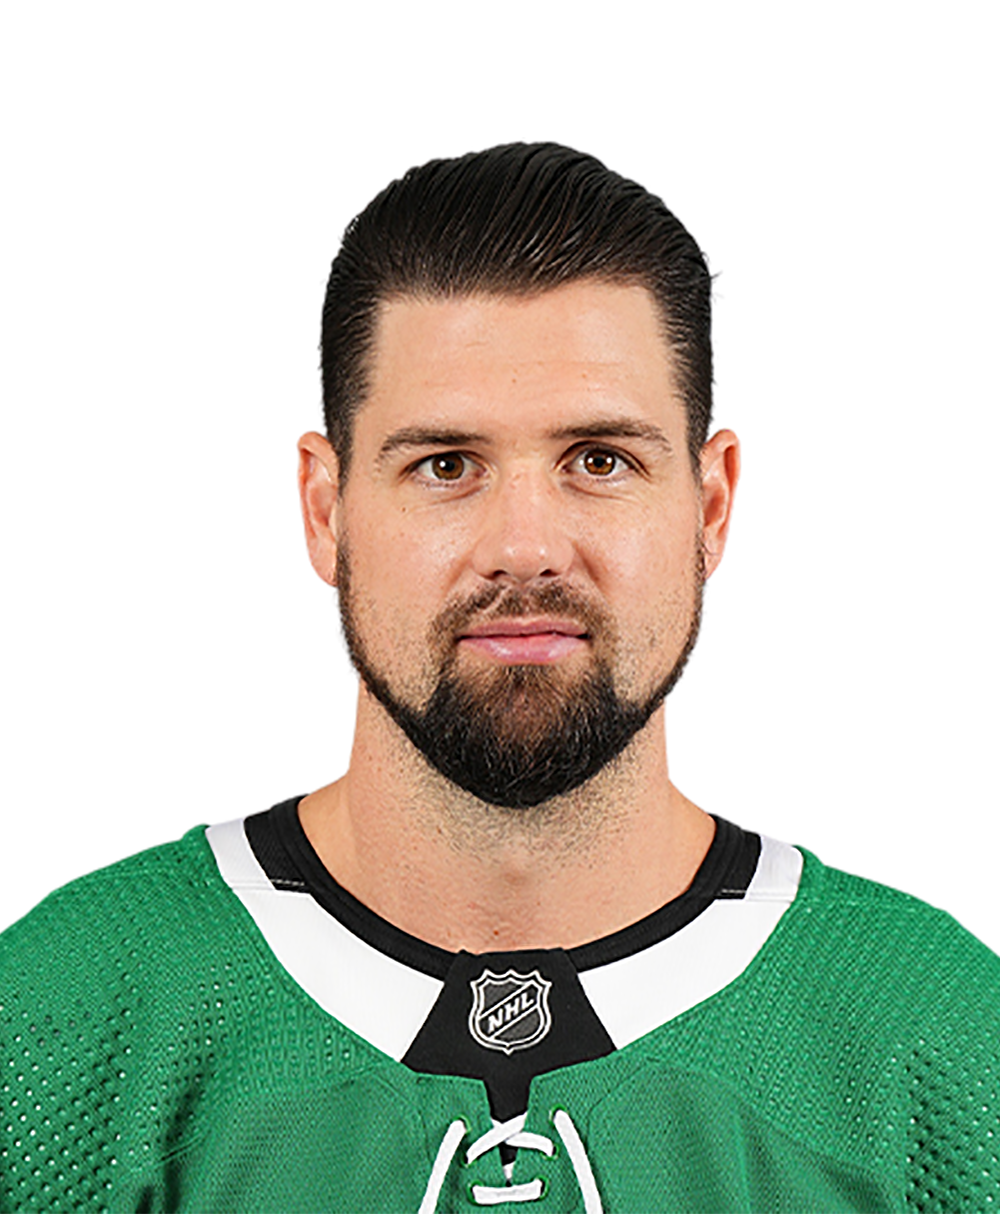 Sportsnet on X: Jamie Benn has been given a 5 minute major for